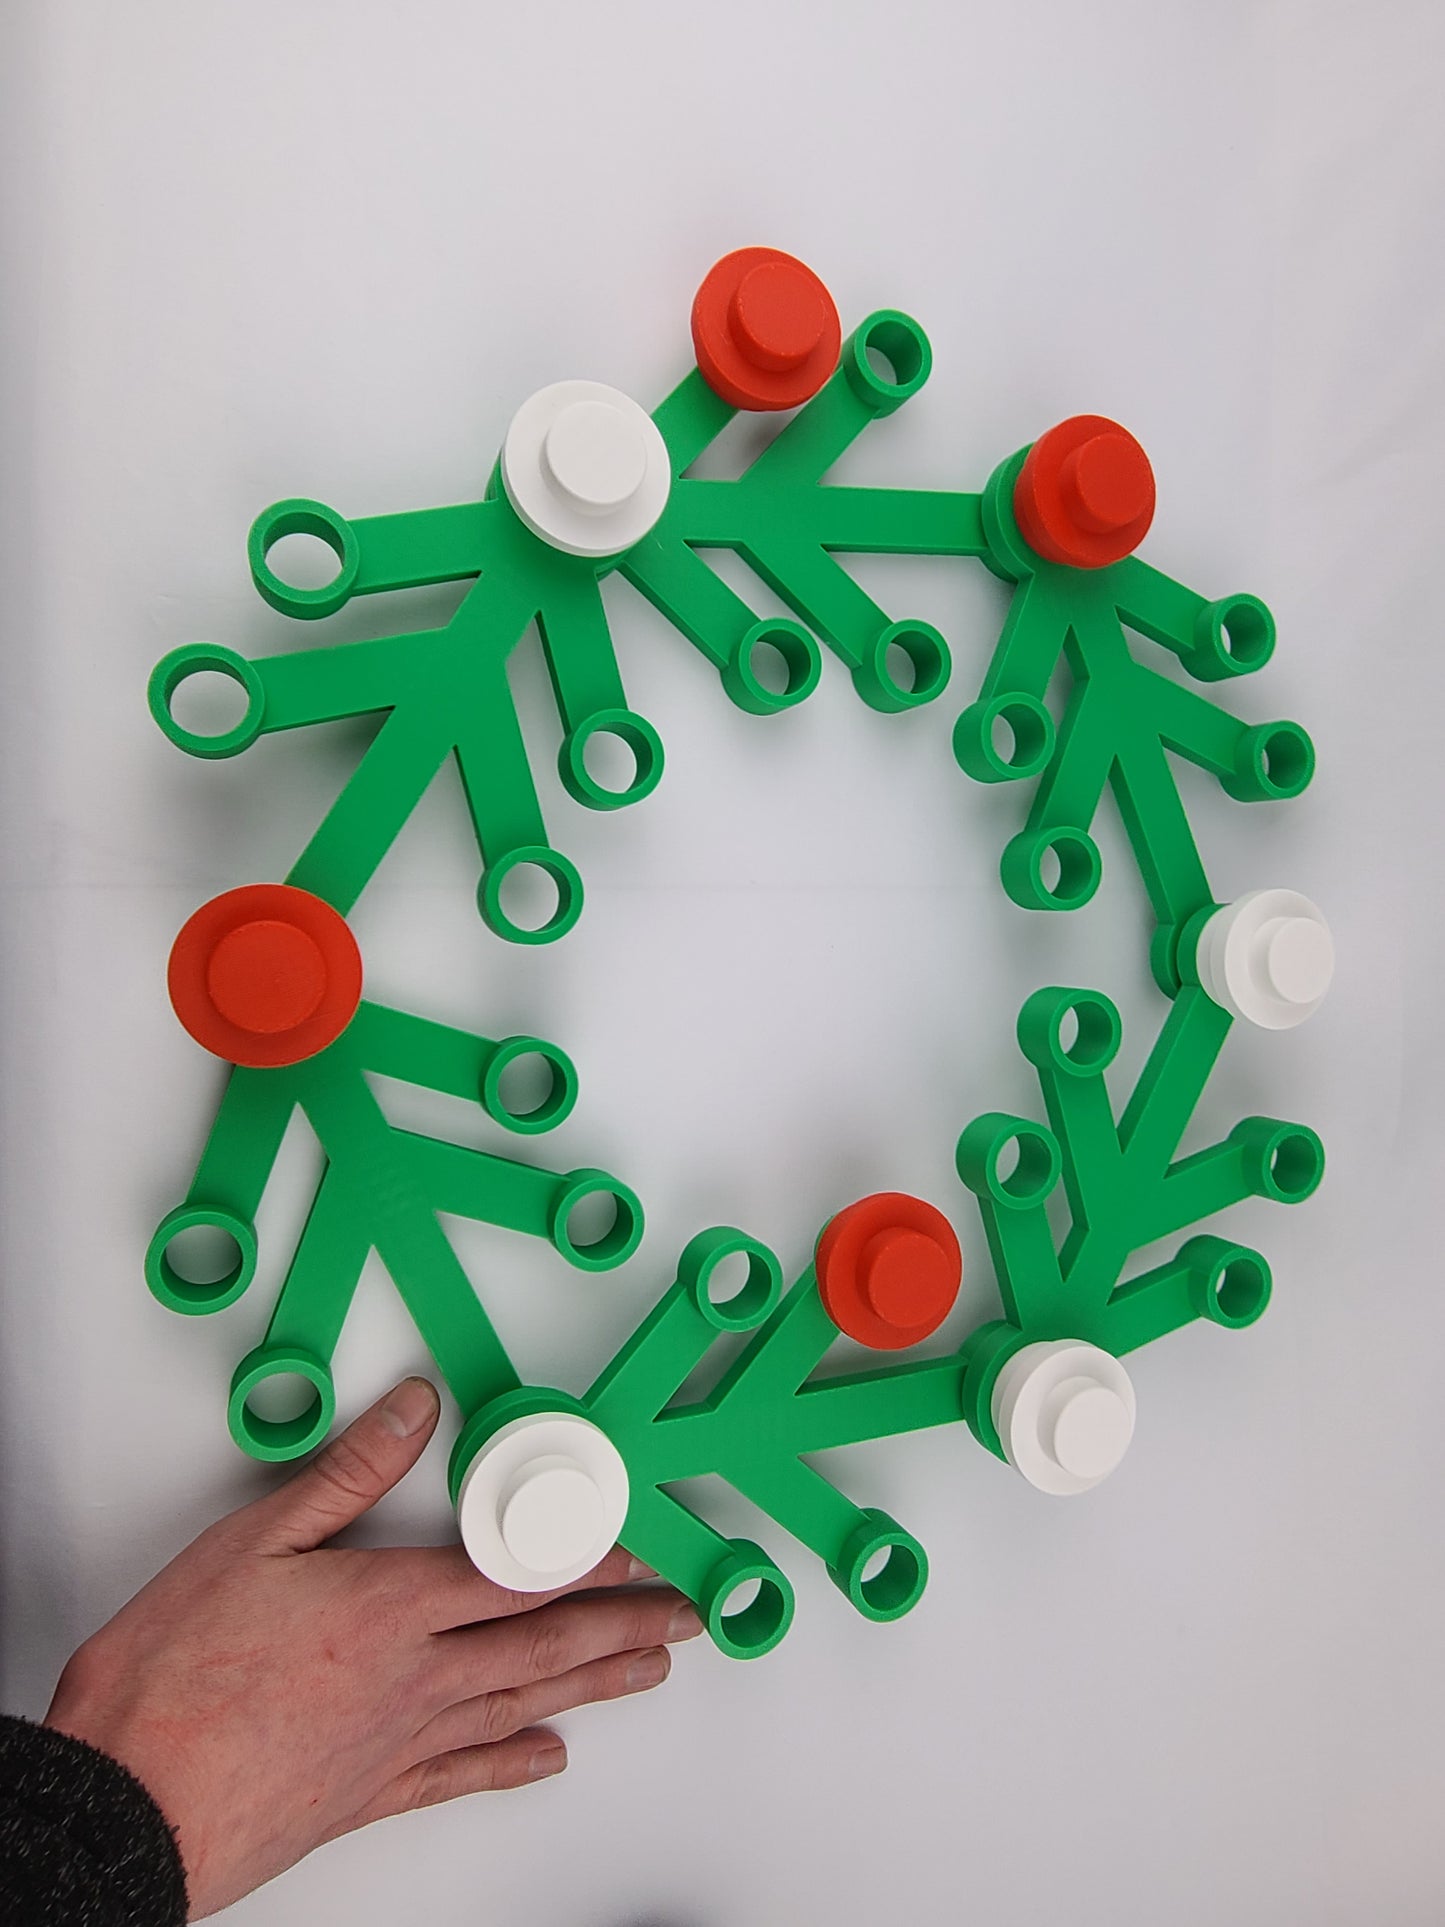 LEGO-Inspired Giant Wreath 18 x 18 inch - 3D Printed - Custom color options available!